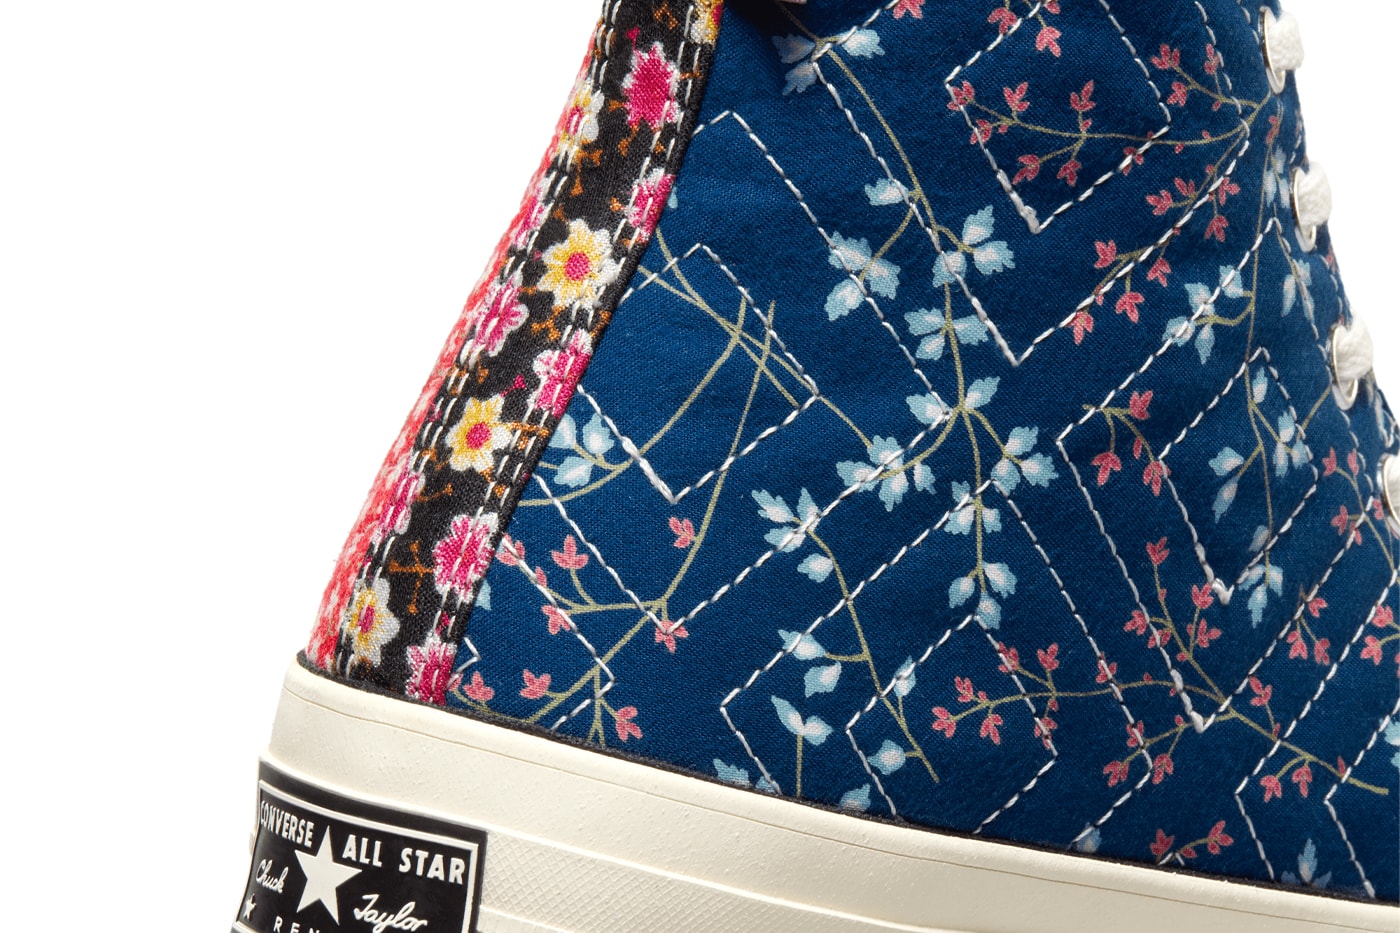 Beyond Retro Converse Chuck 70 upcycled floral A04618C A04617C Release Info